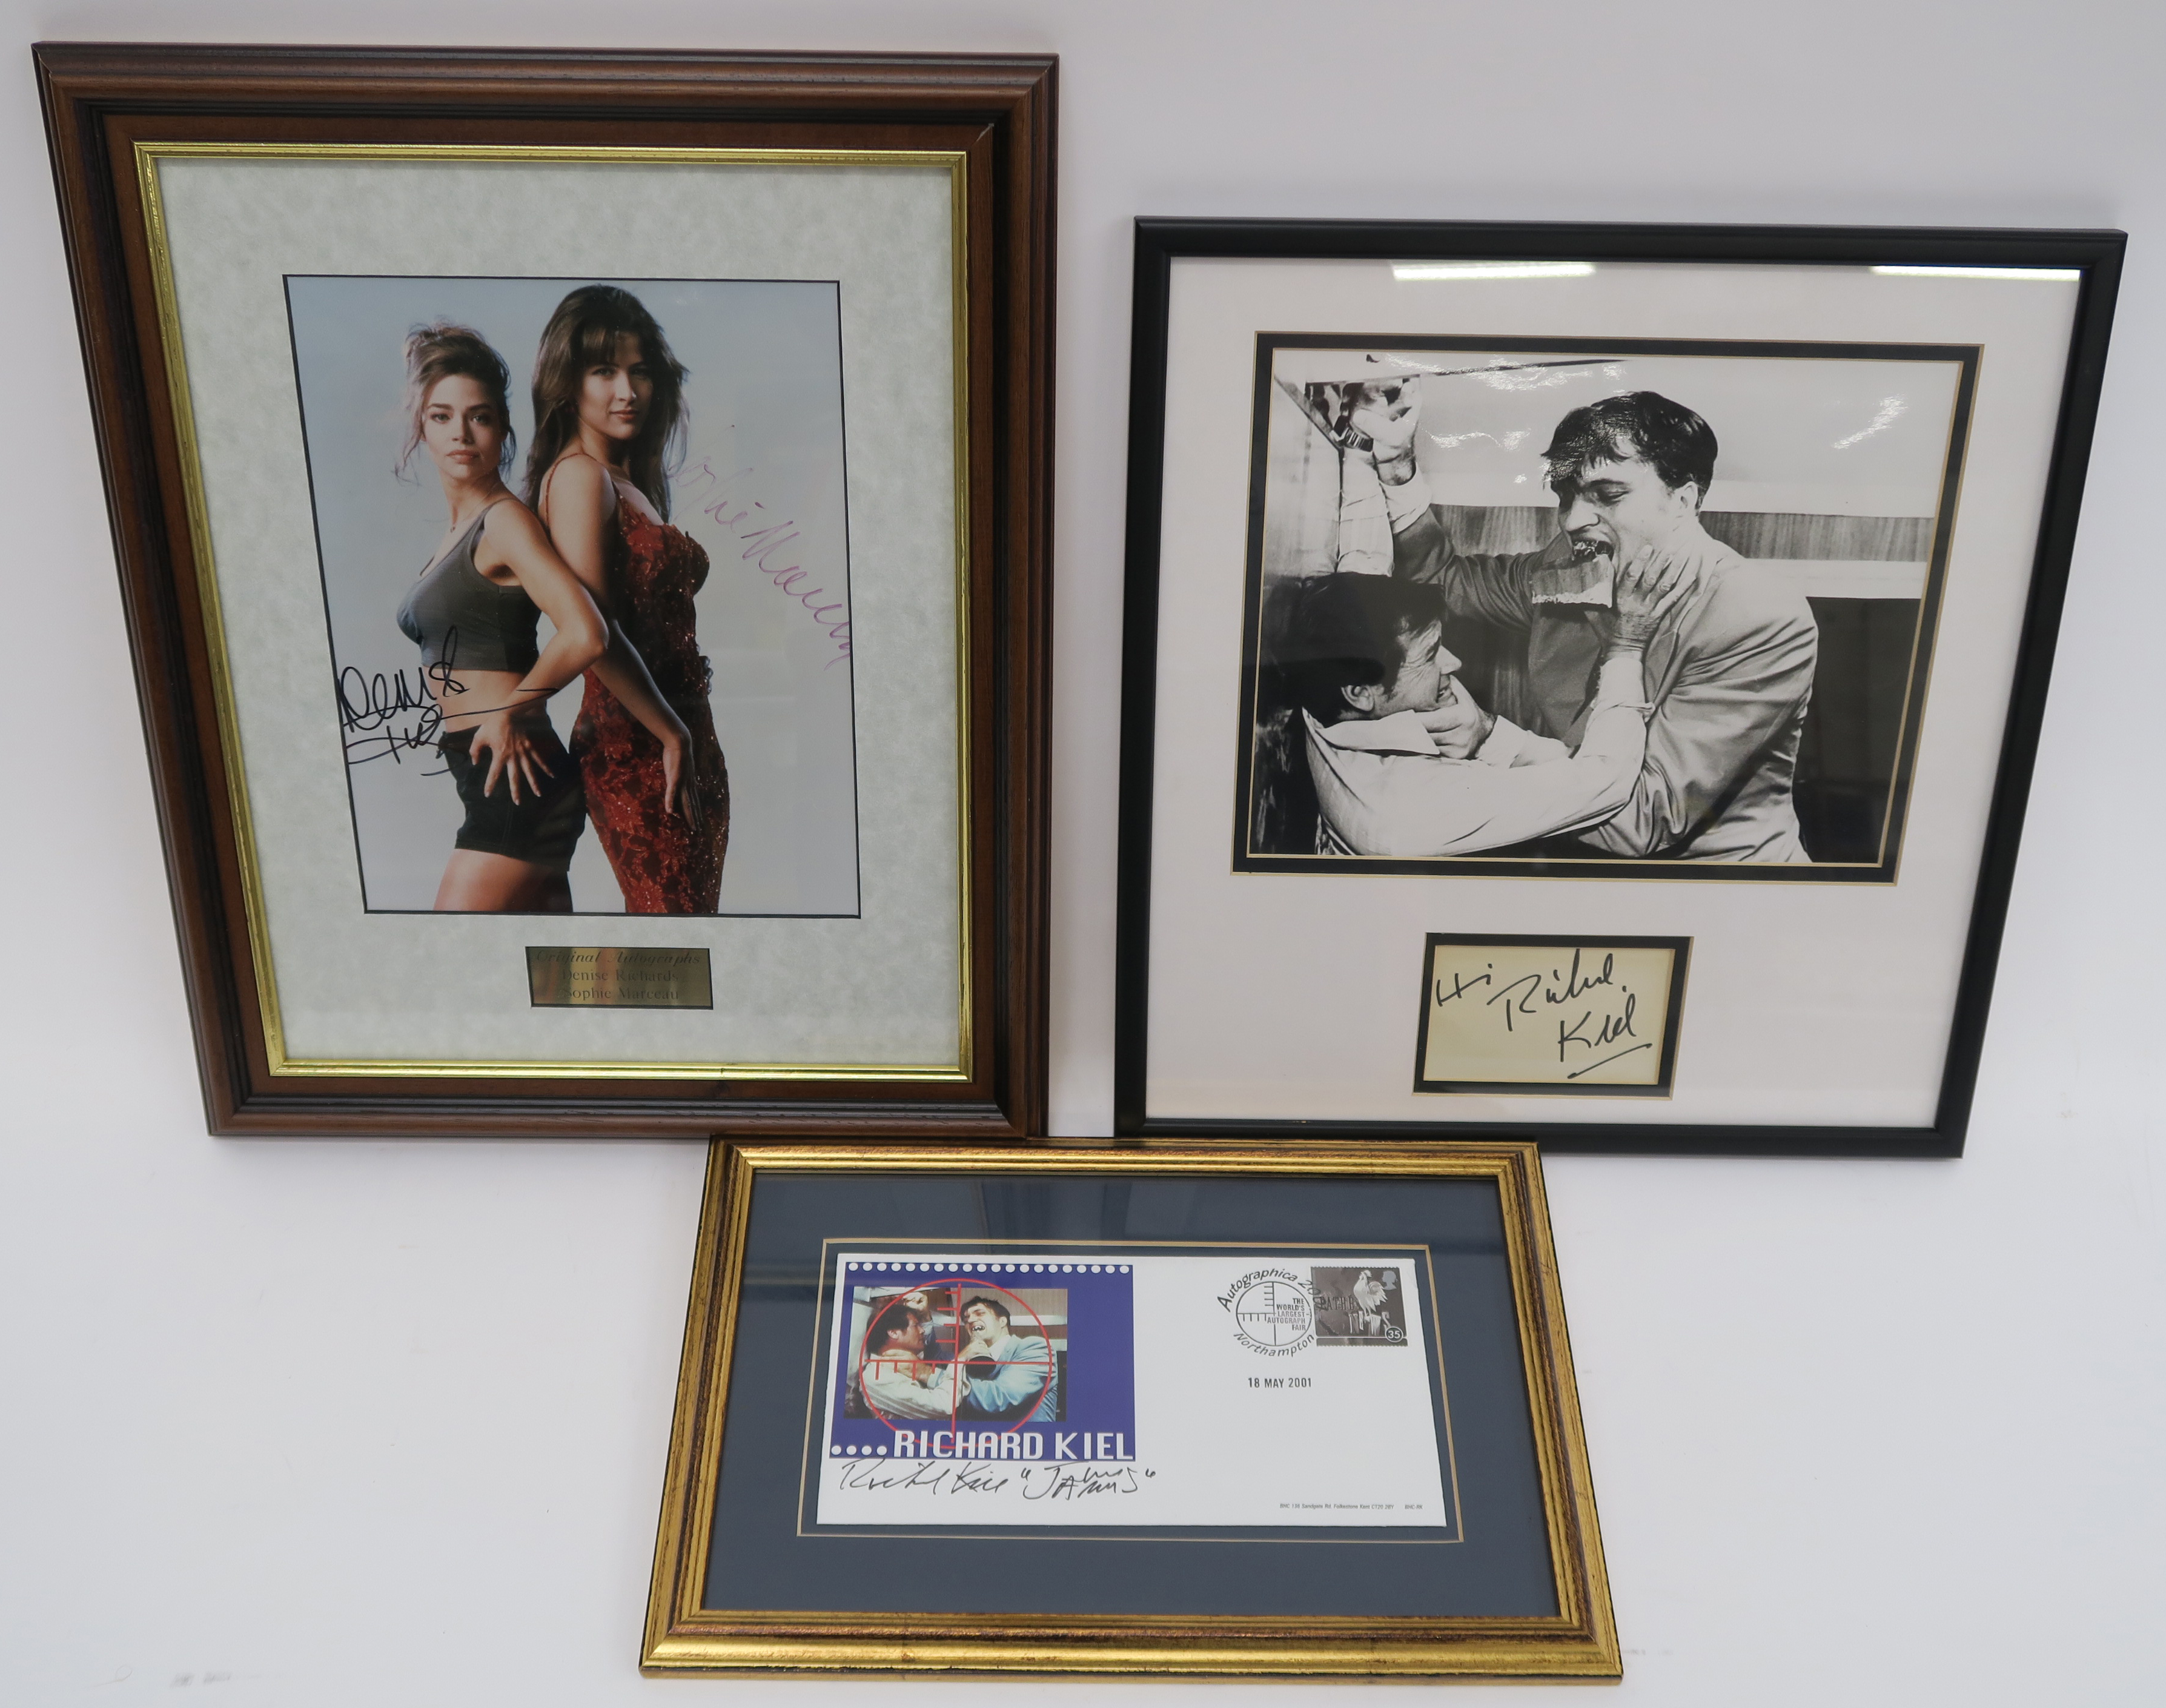 James Bond signed photos including Denise Richards and Sophie Marceau from The World is Not Enough